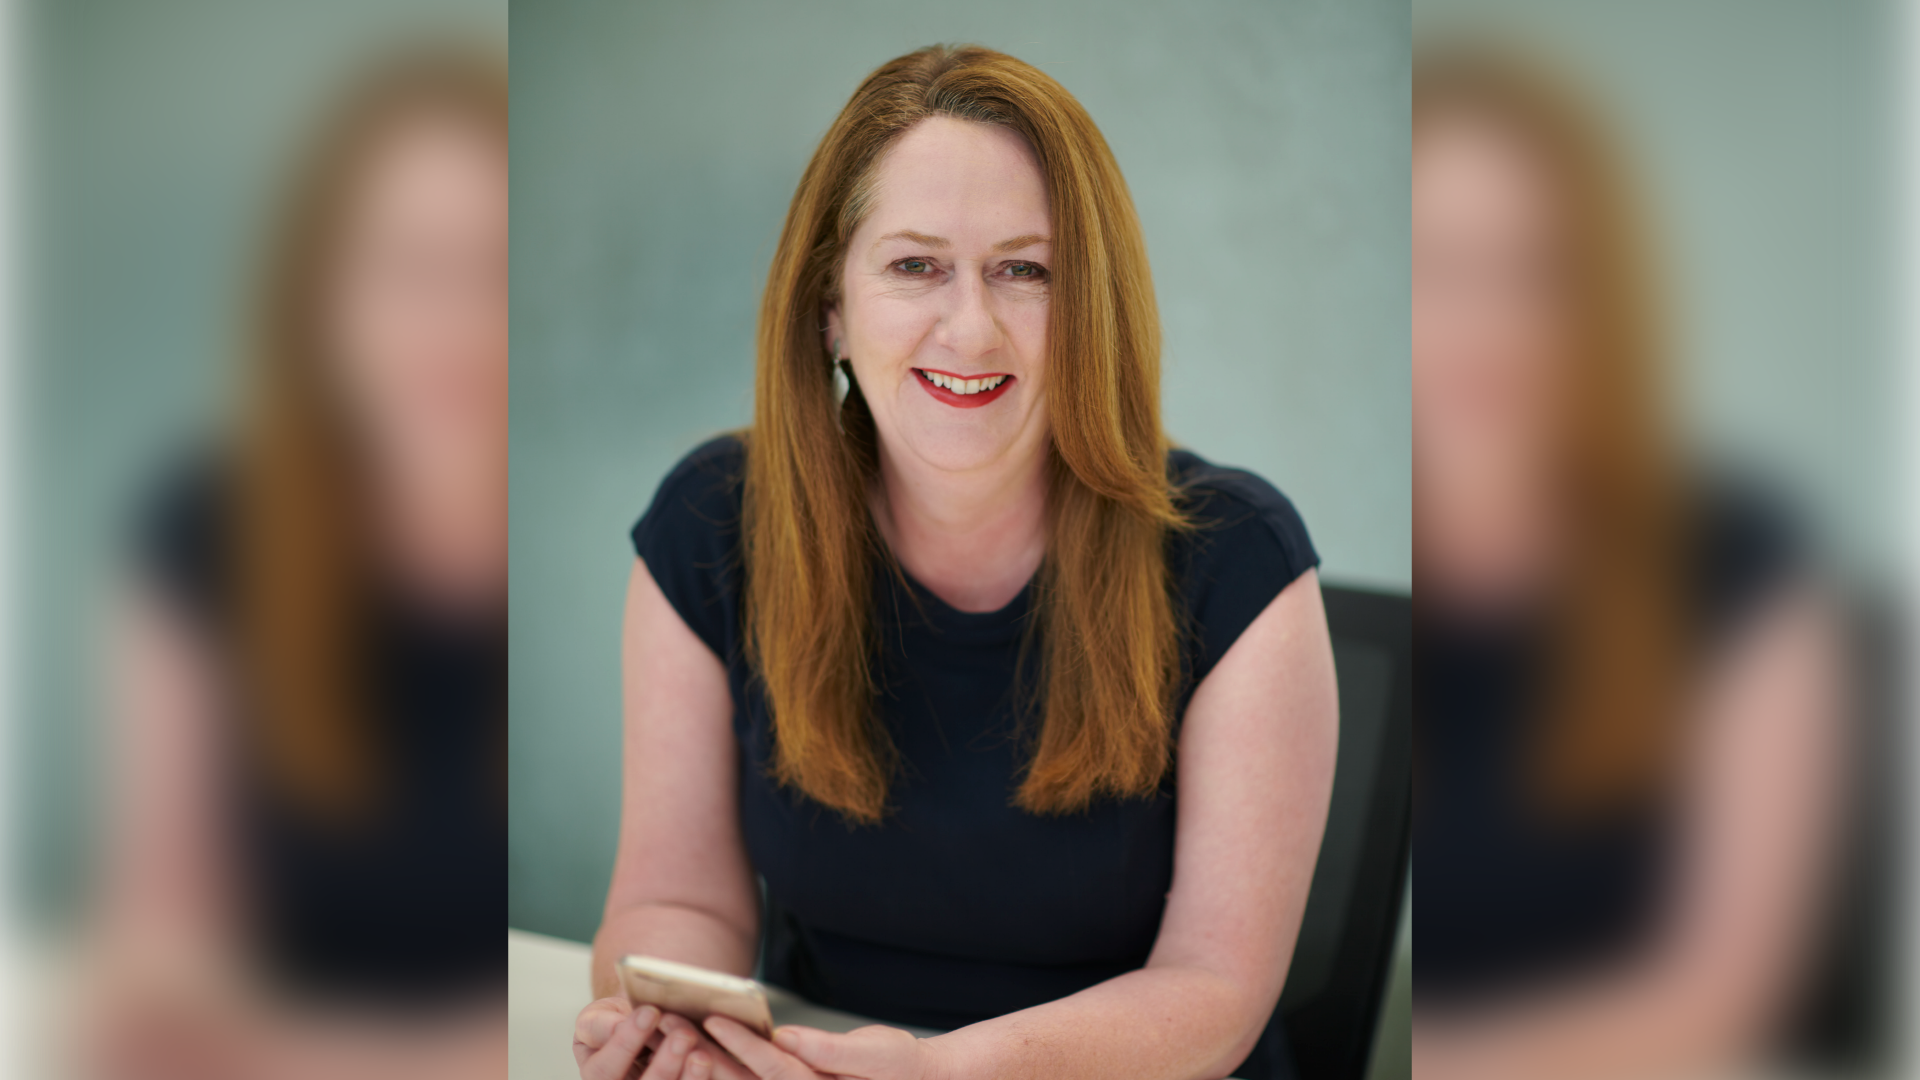 Swinburne alum and Associate Professor in Accounting at Swinburne, Dr Gráinne Oates is sitting at a desk smiling directly at the camera